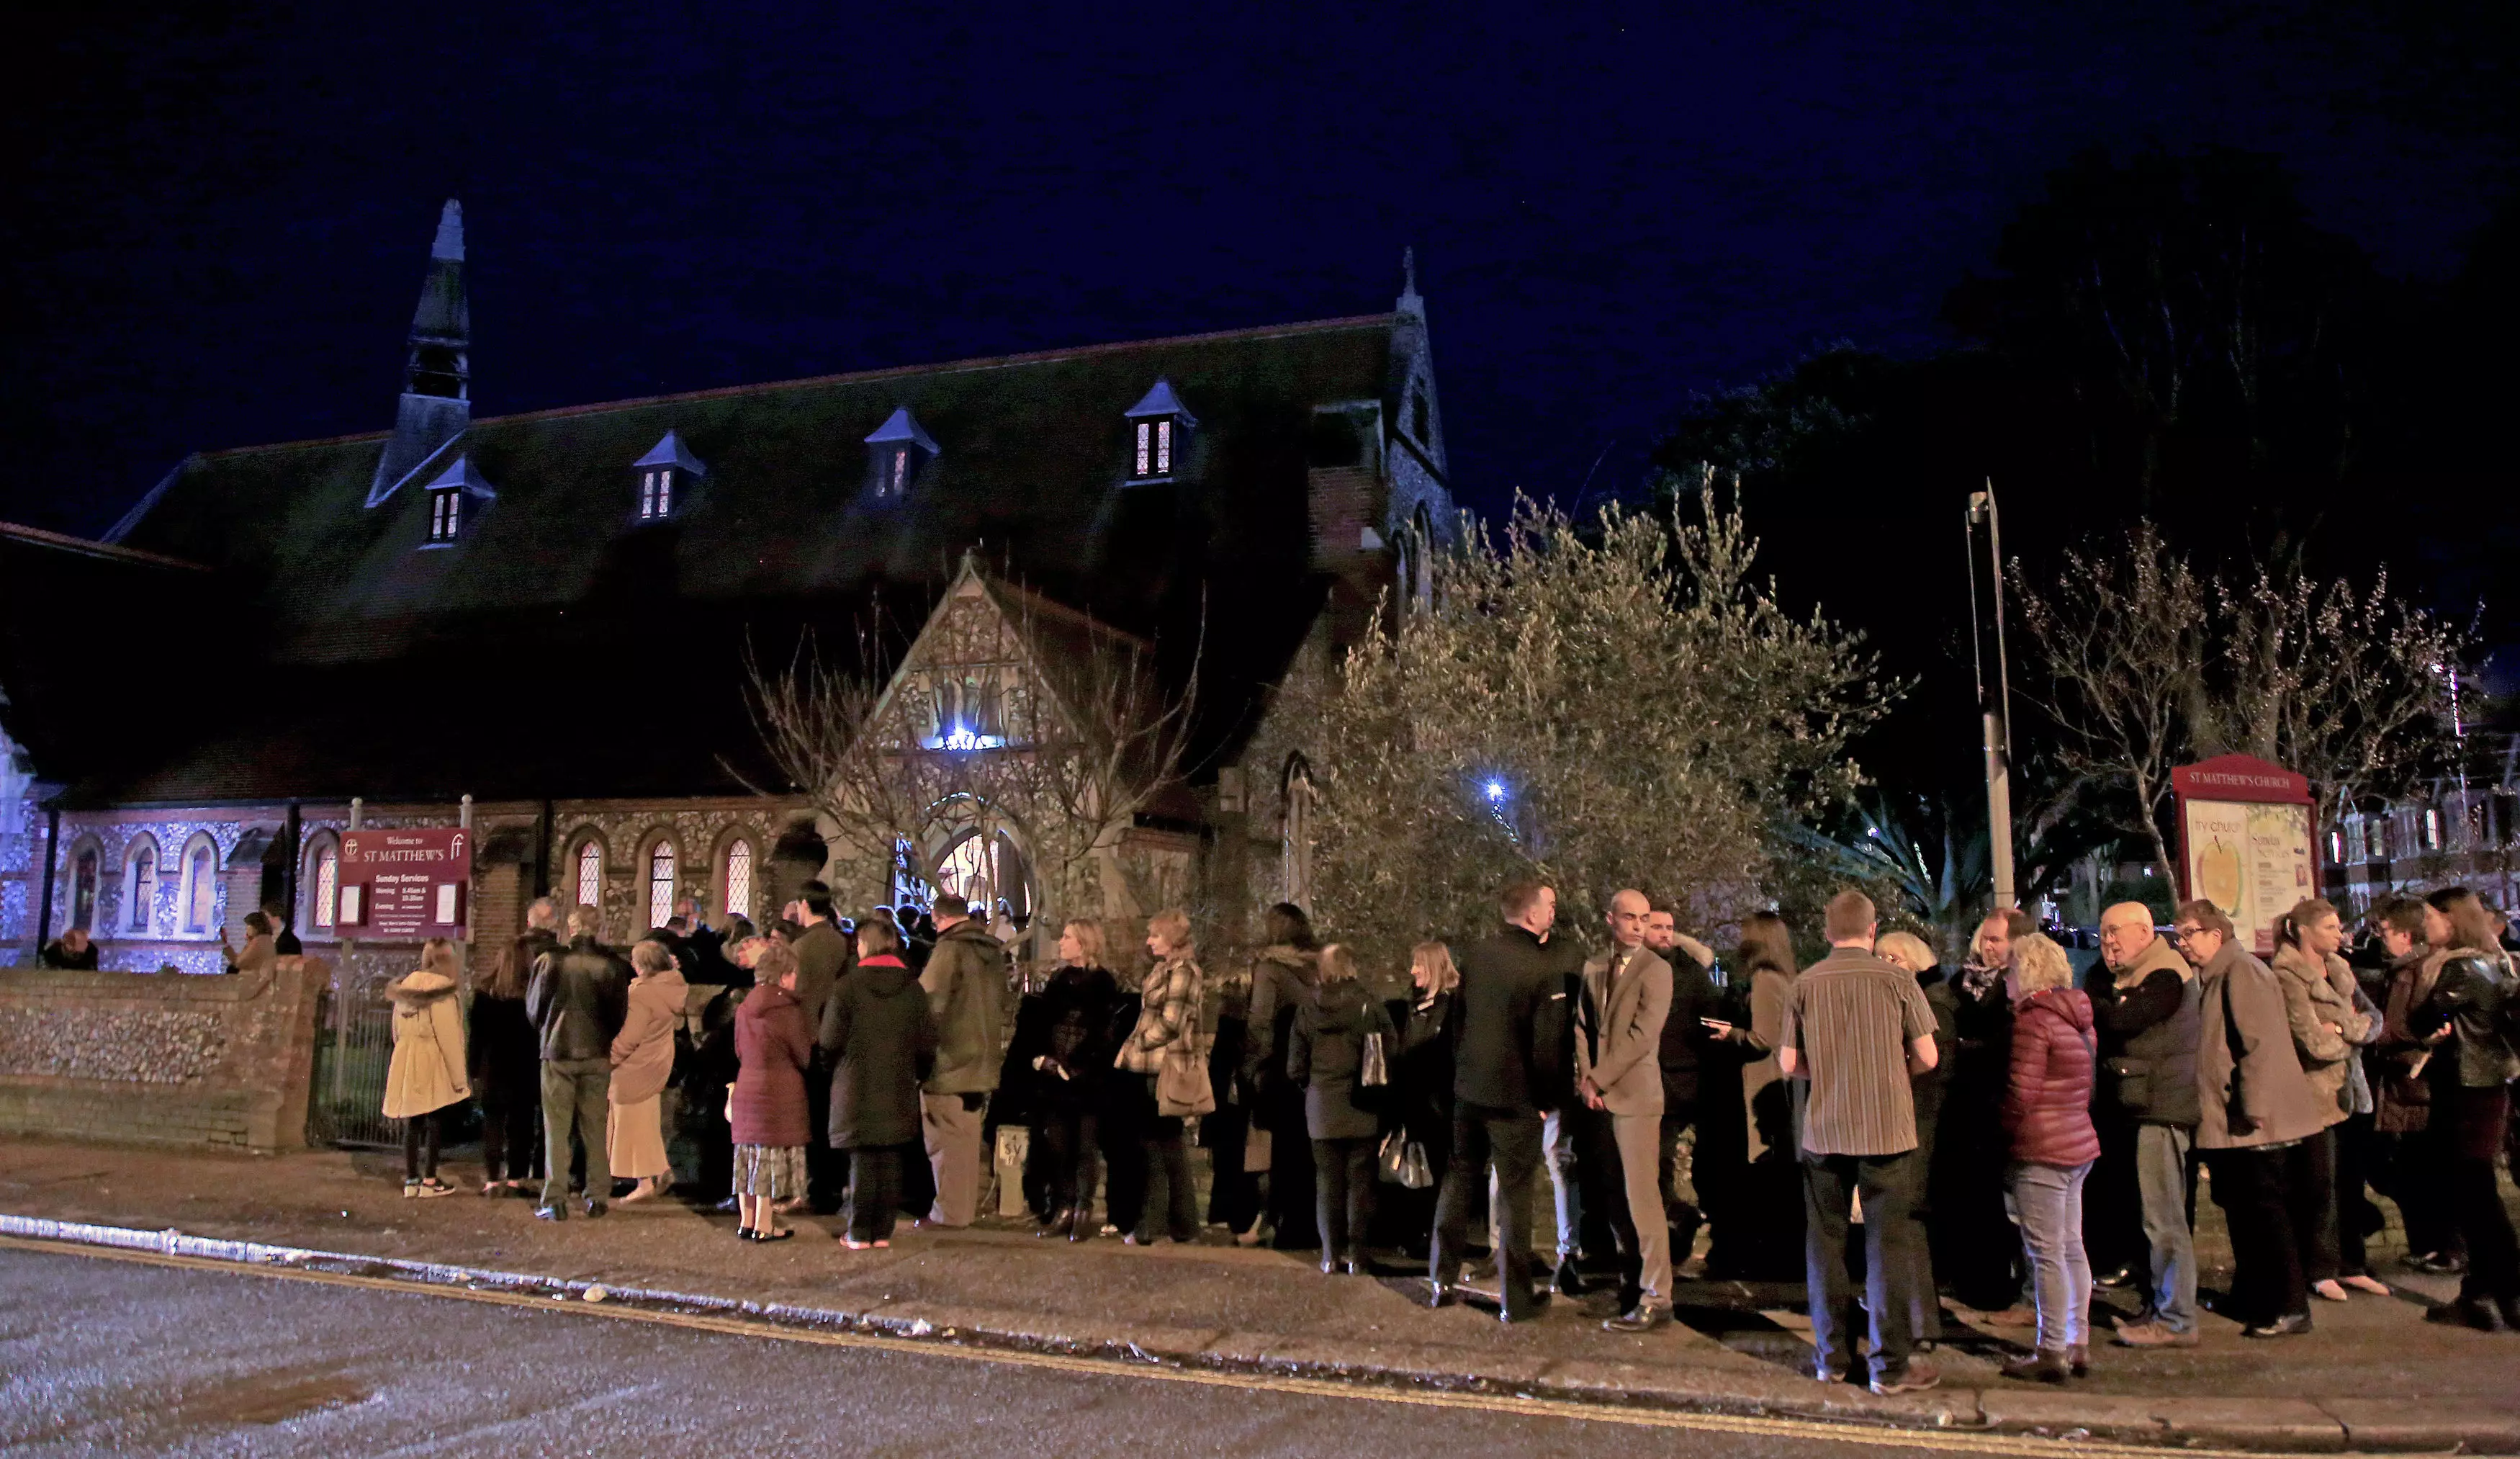 Mourners gather at St. Matthews Church in Worthing, West Sussex, for a memorial service for Stuart and Jason Hill, who were killed alongside Becky Dobson.